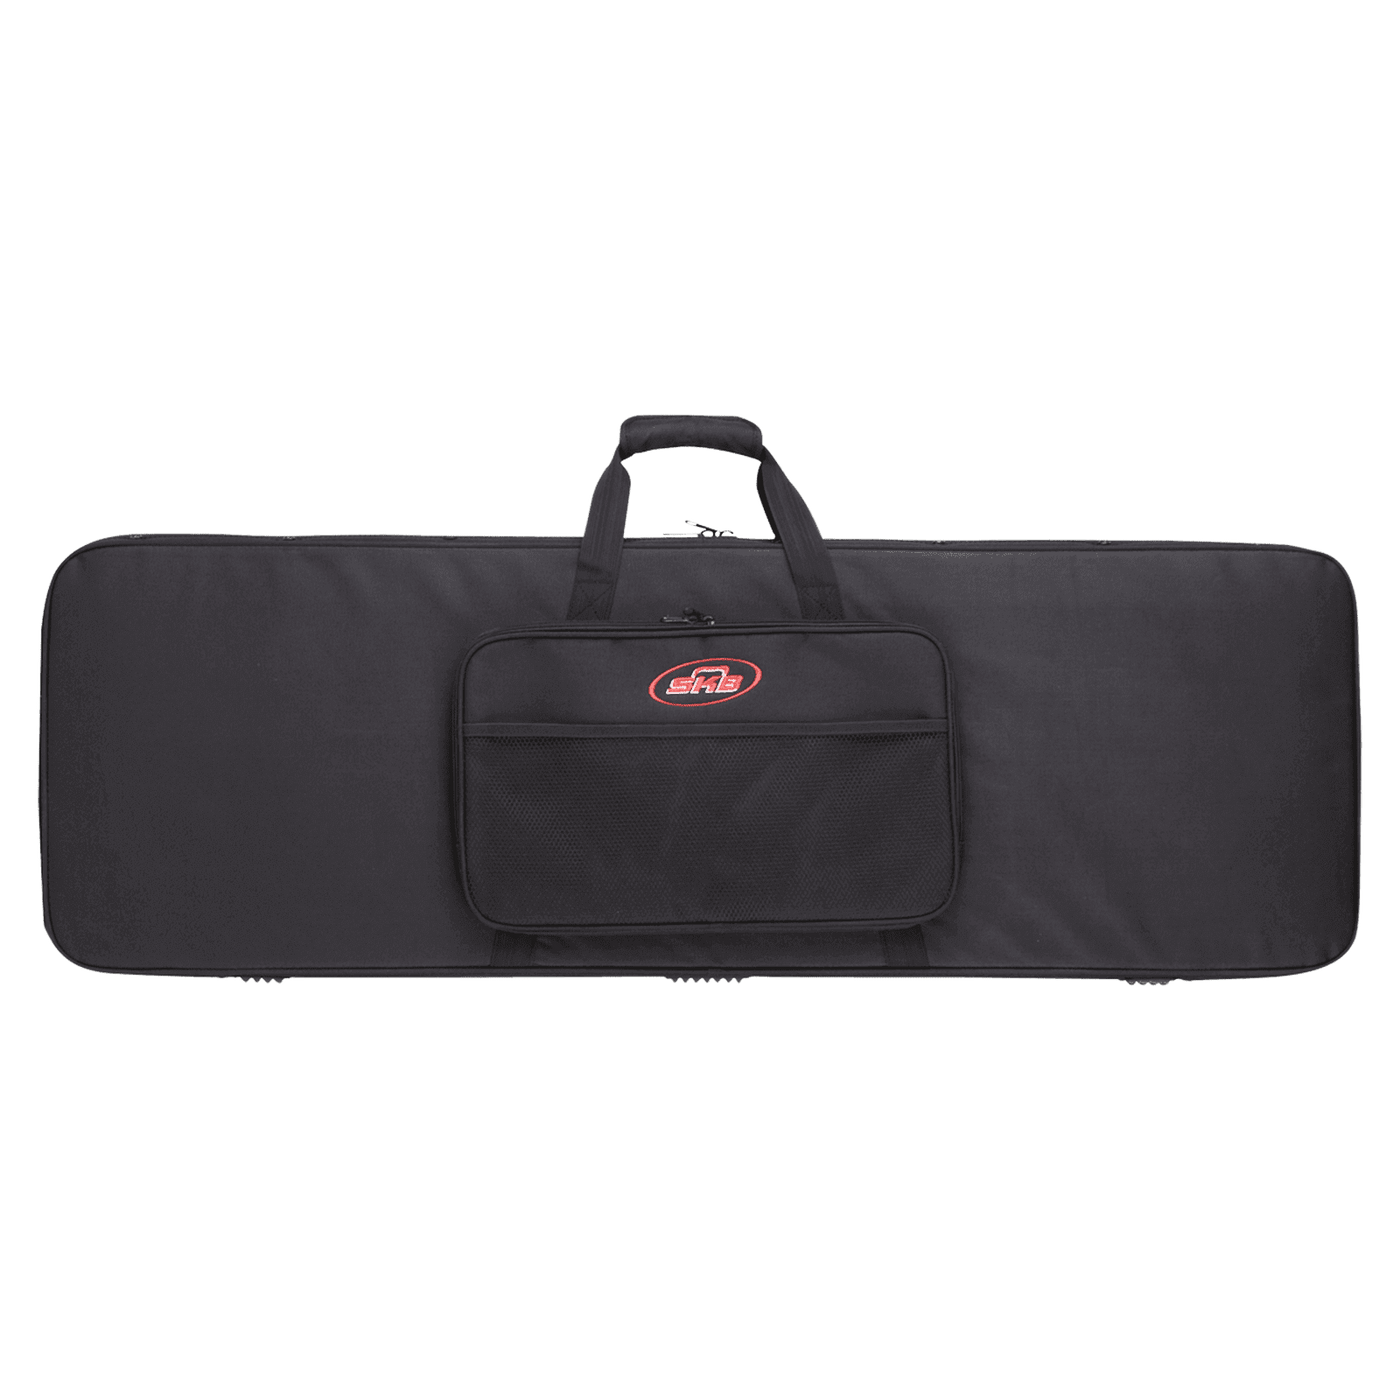 SKB Electric Bass Soft Case - SKB's 1SKB-SC44 universal electric bass soft case offers your bass the protection of a hard case plus the portability of a gig bag - all for a great low price! The 1SKB-SC44 gives you the same rigid foam you'll find in SKB's